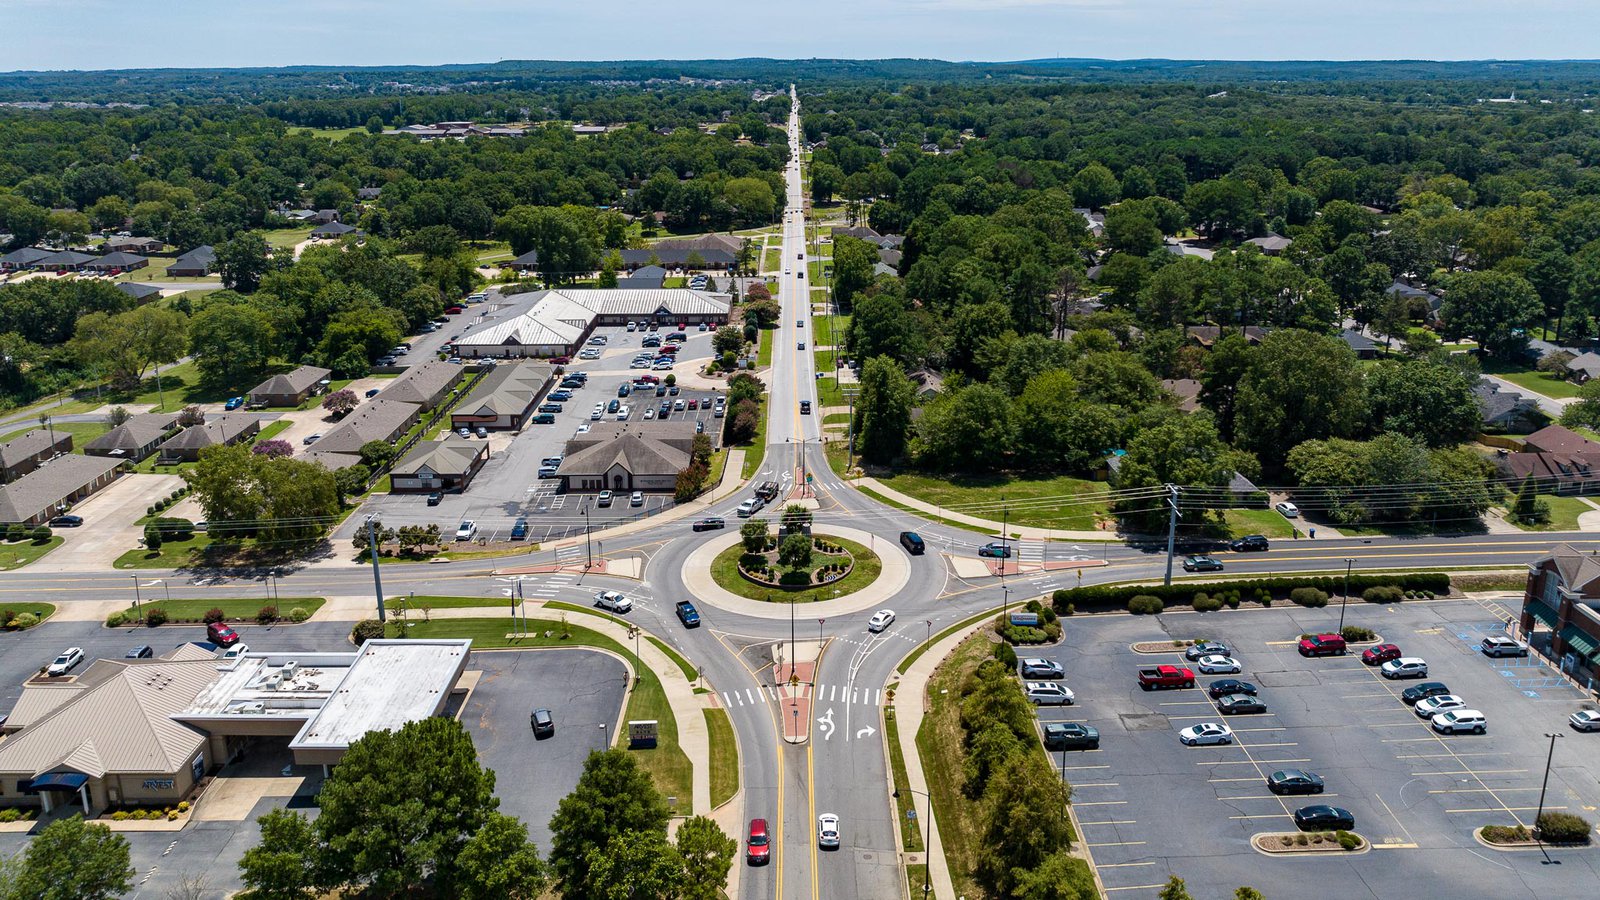 salem-rd-college-ave-roundabout-south-thumbnail.jpg